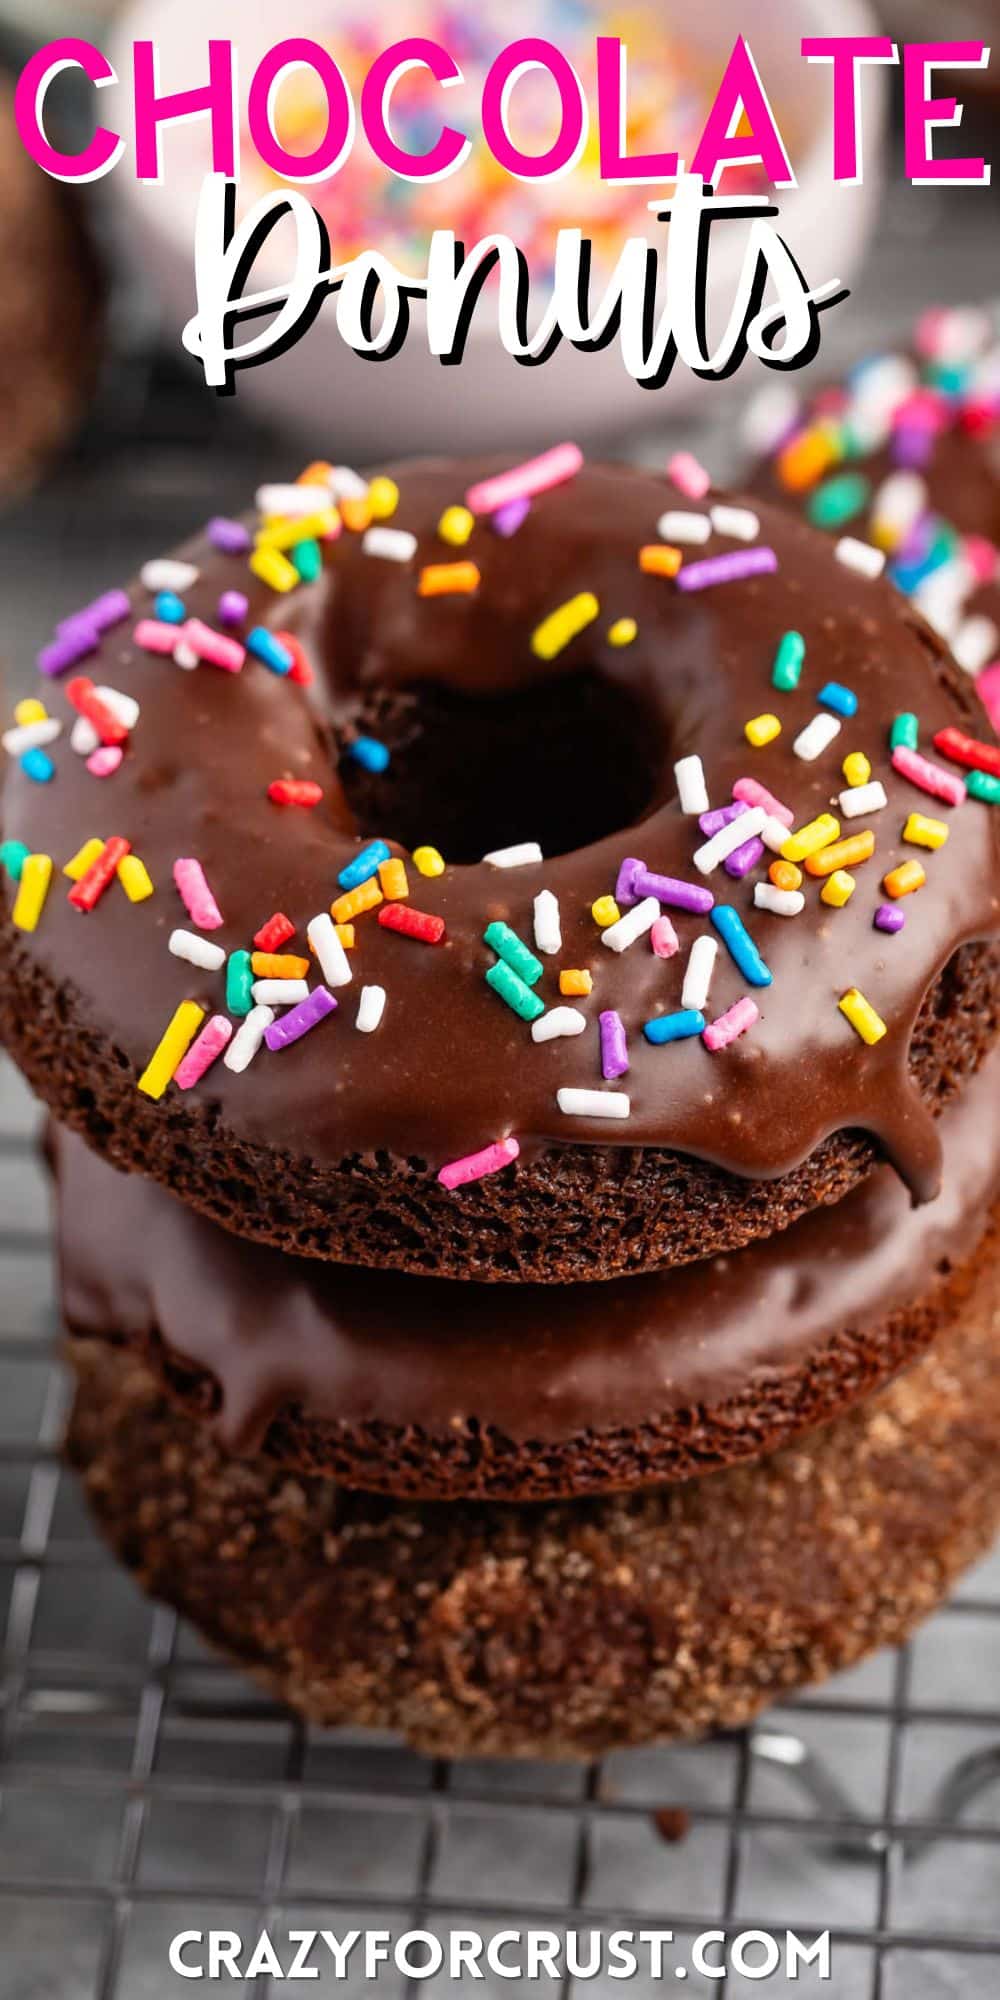 stacked chocolate donuts with chocolate glaze and colorful sprinkles on top with words on the image.